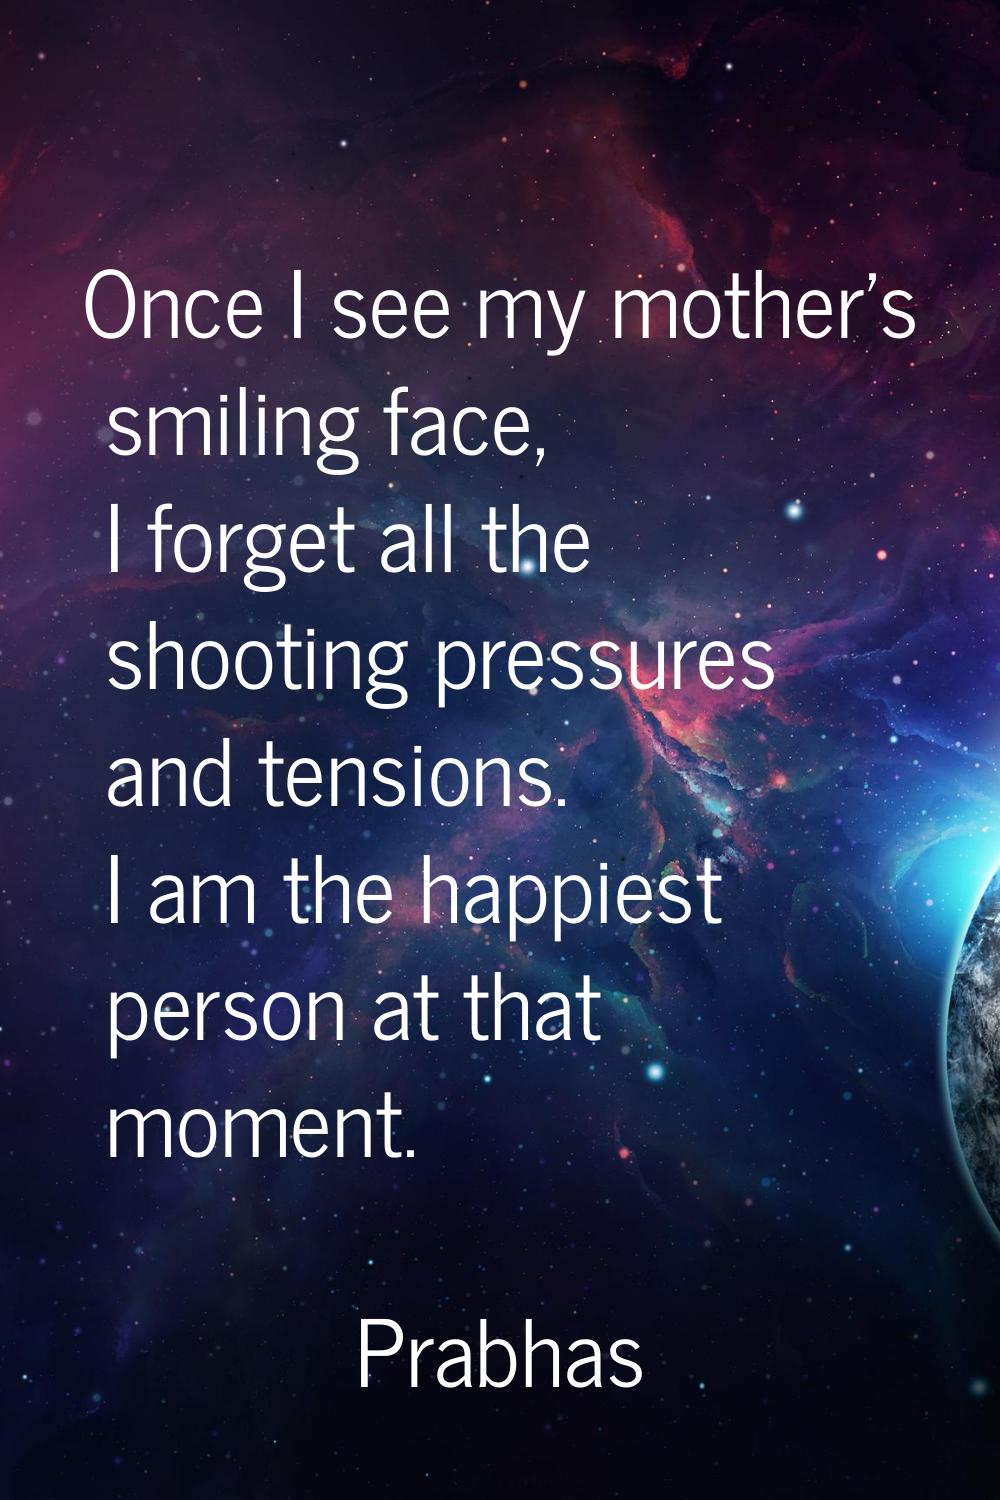 Once I see my mother's smiling face, I forget all the shooting pressures and tensions. I am the hap